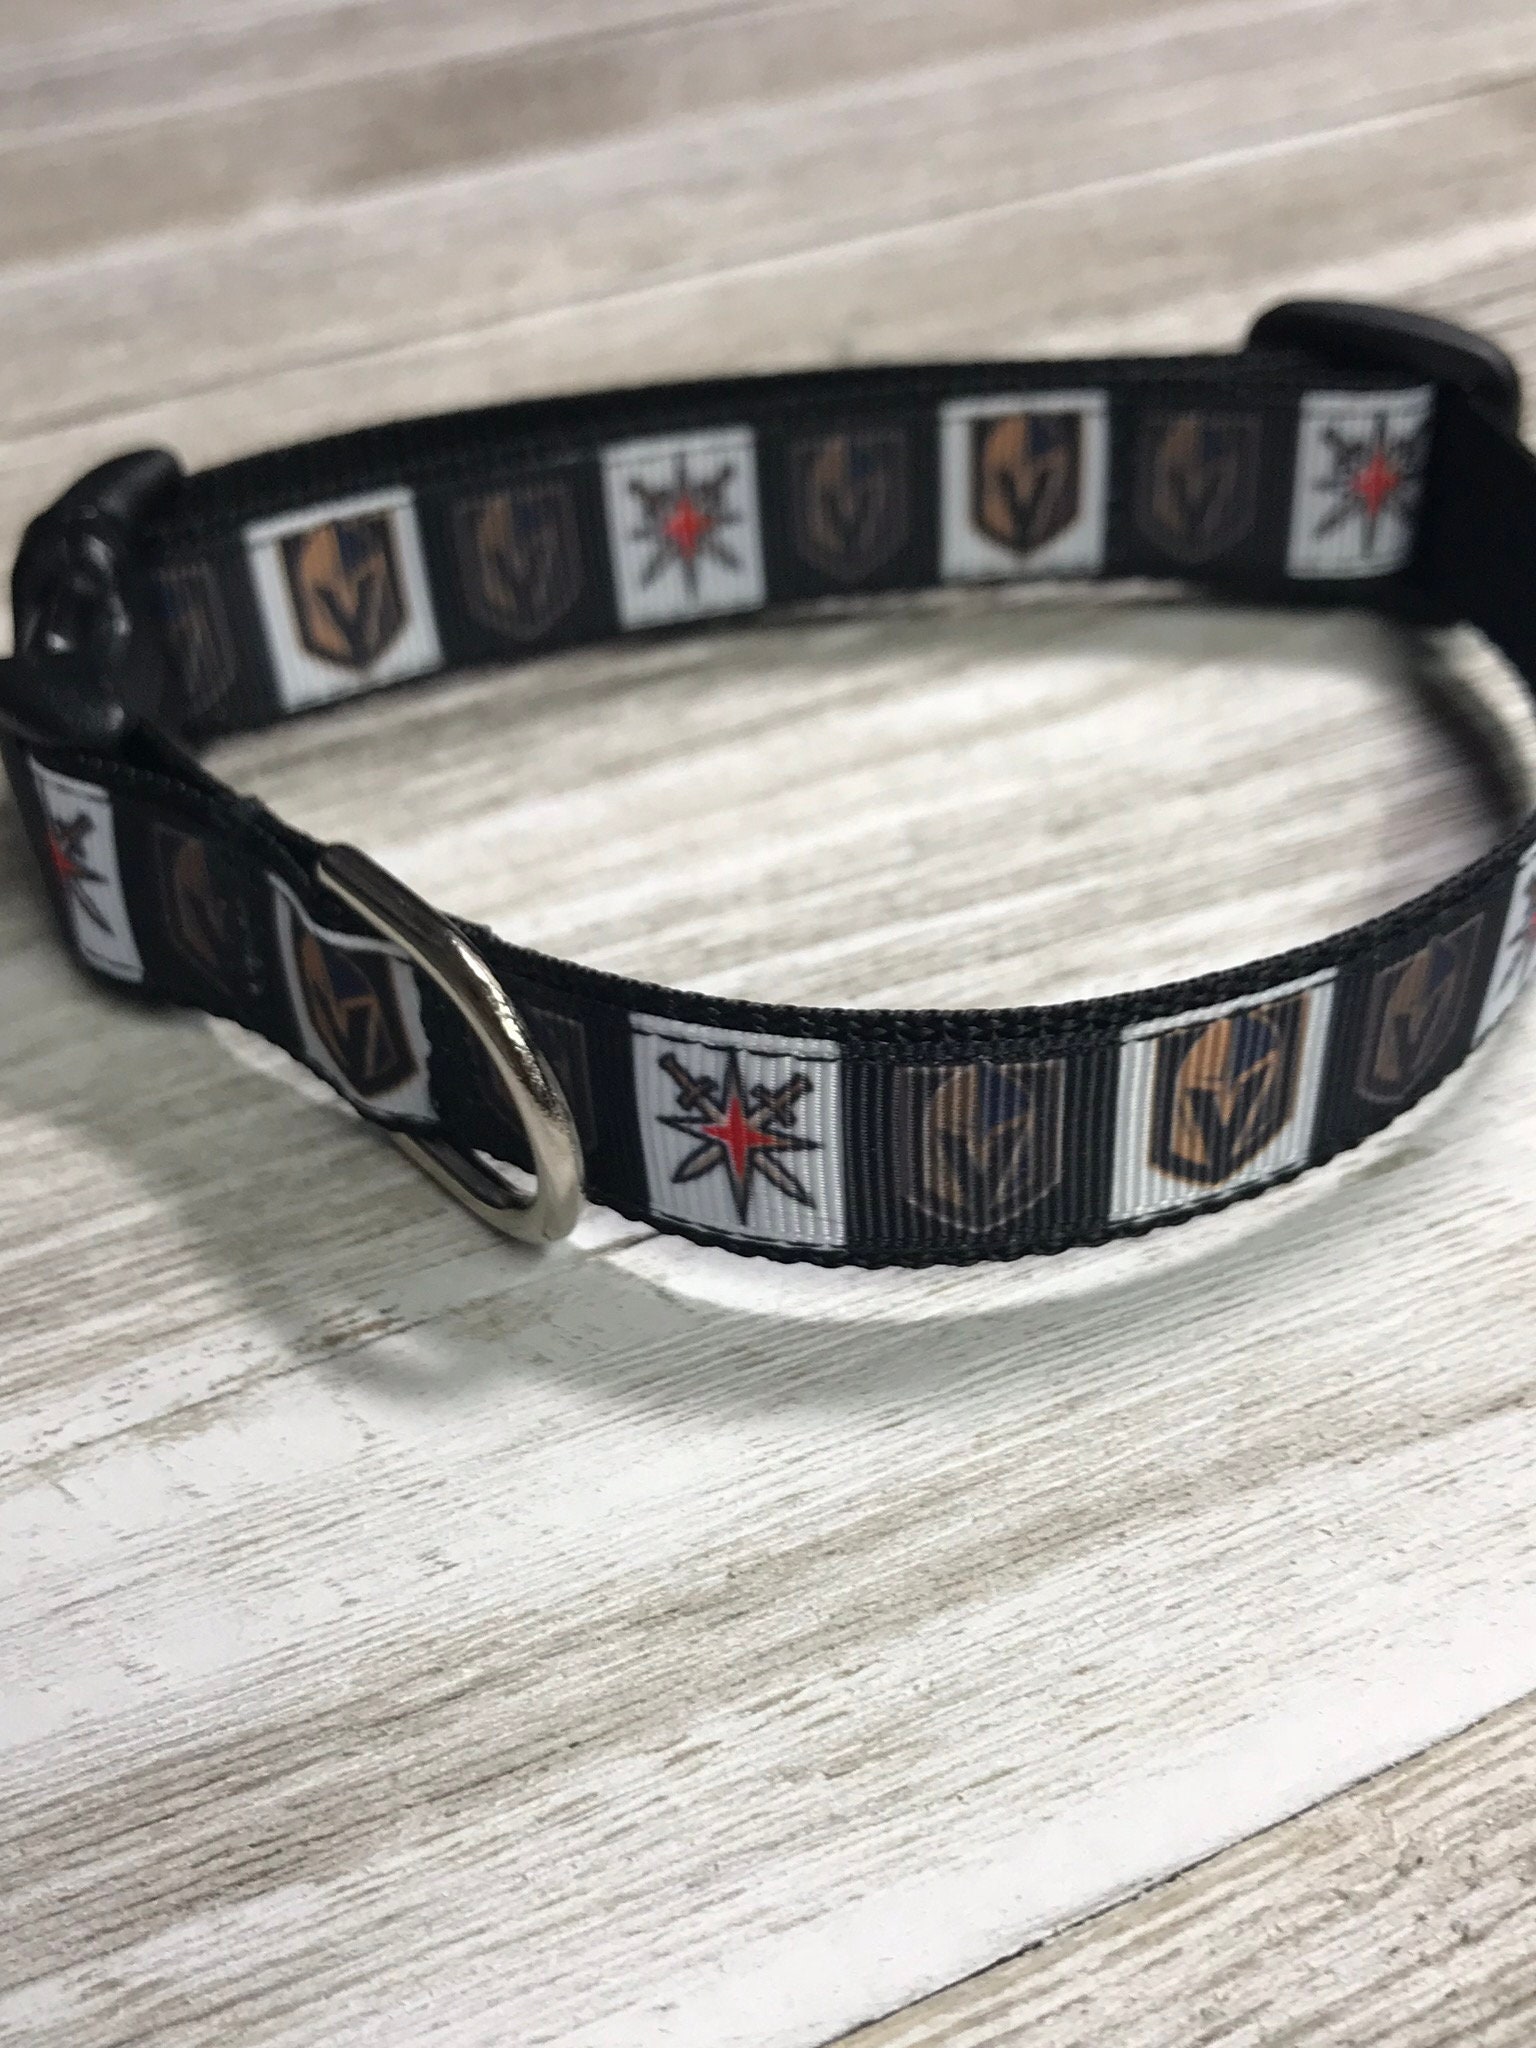  Pets First NHL LAS Vegas Golden Knights Collar for Dogs &  Cats, Small. - Adjustable, Cute & Stylish! The Ultimate Hockey Fan Collar!  : Sports & Outdoors